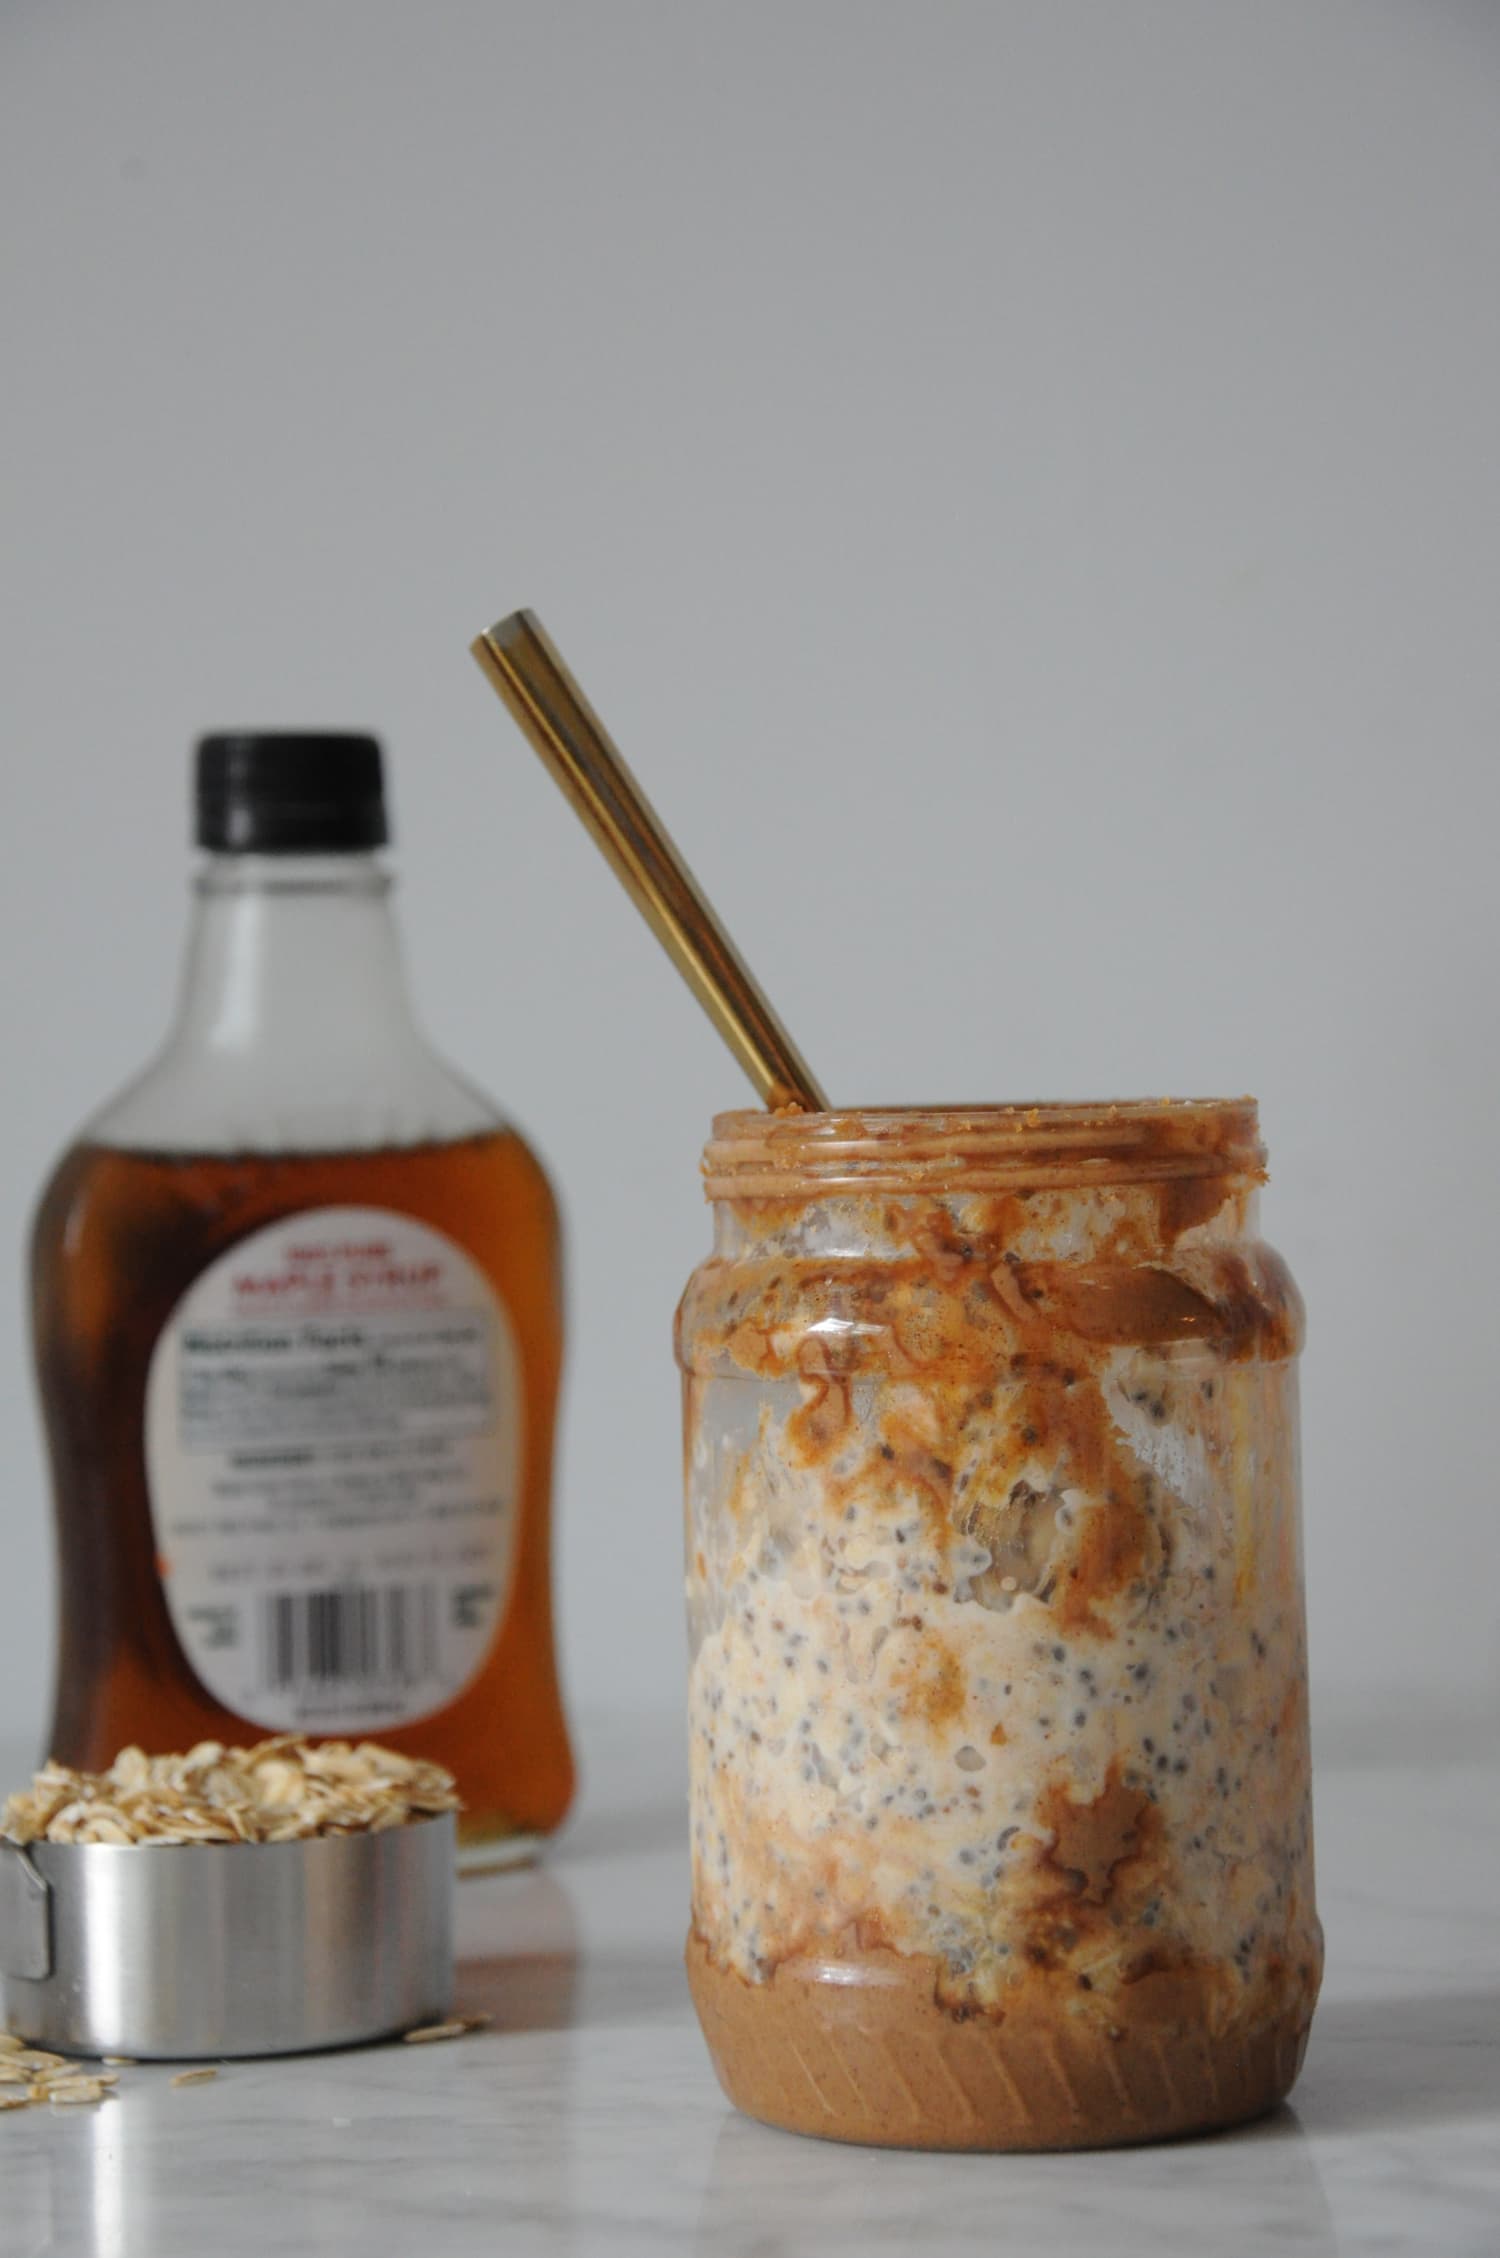 Peanut Butter Jar Almost Empty? Here Are 3 Delicious Things You Can Do with It.